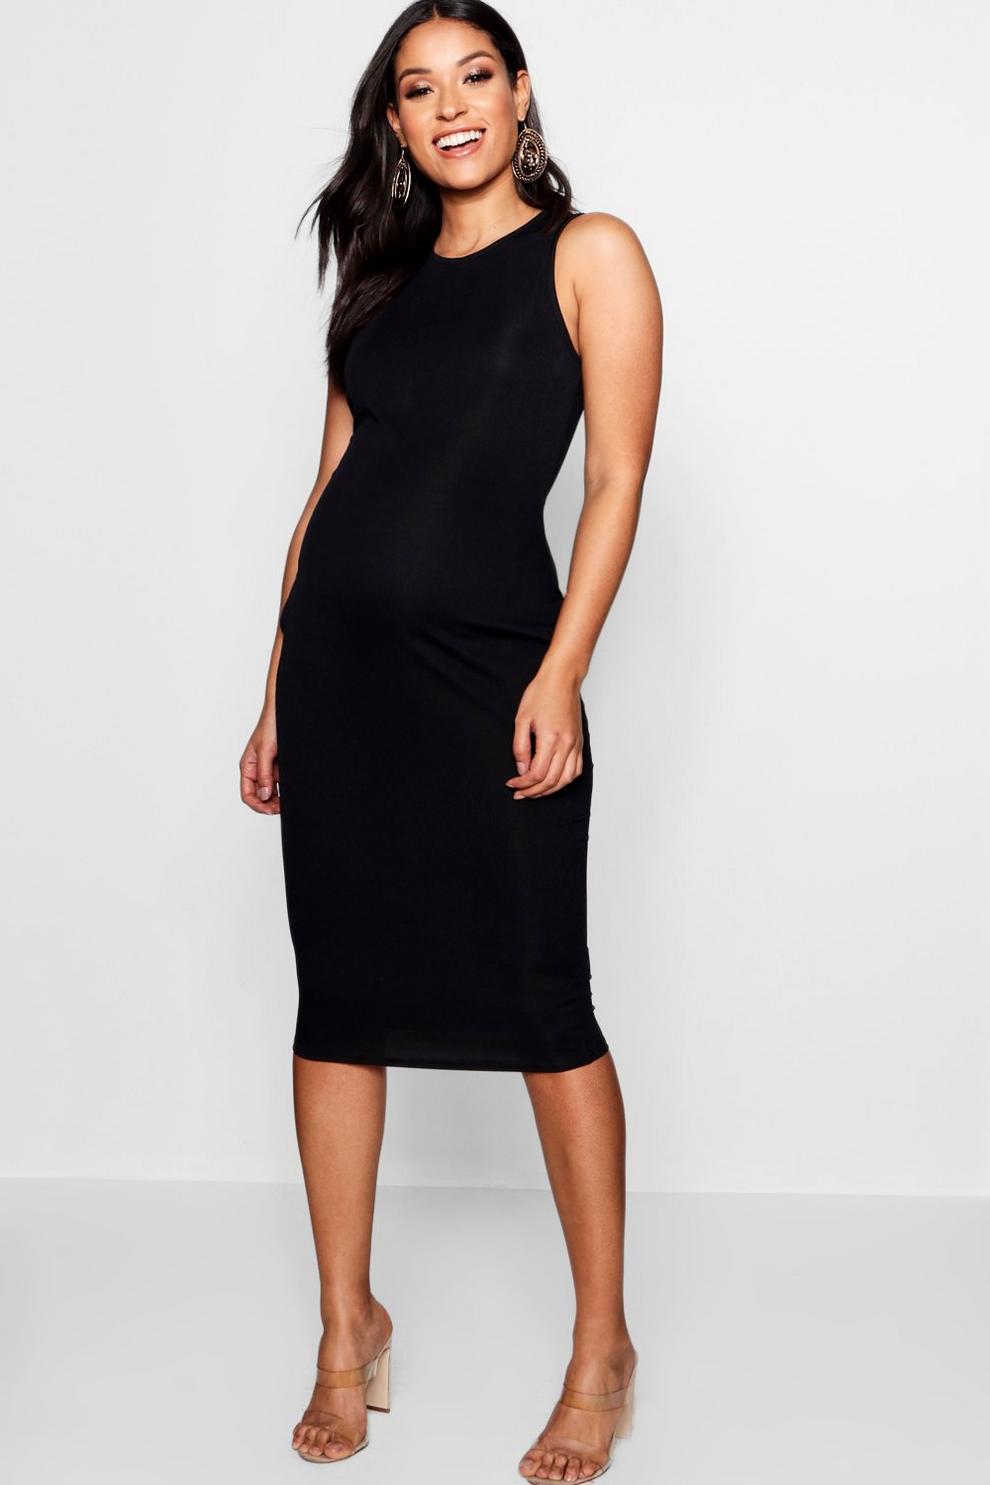 A Mom-To-Be Weighs In On Boohoo's Epic Maternity Sale